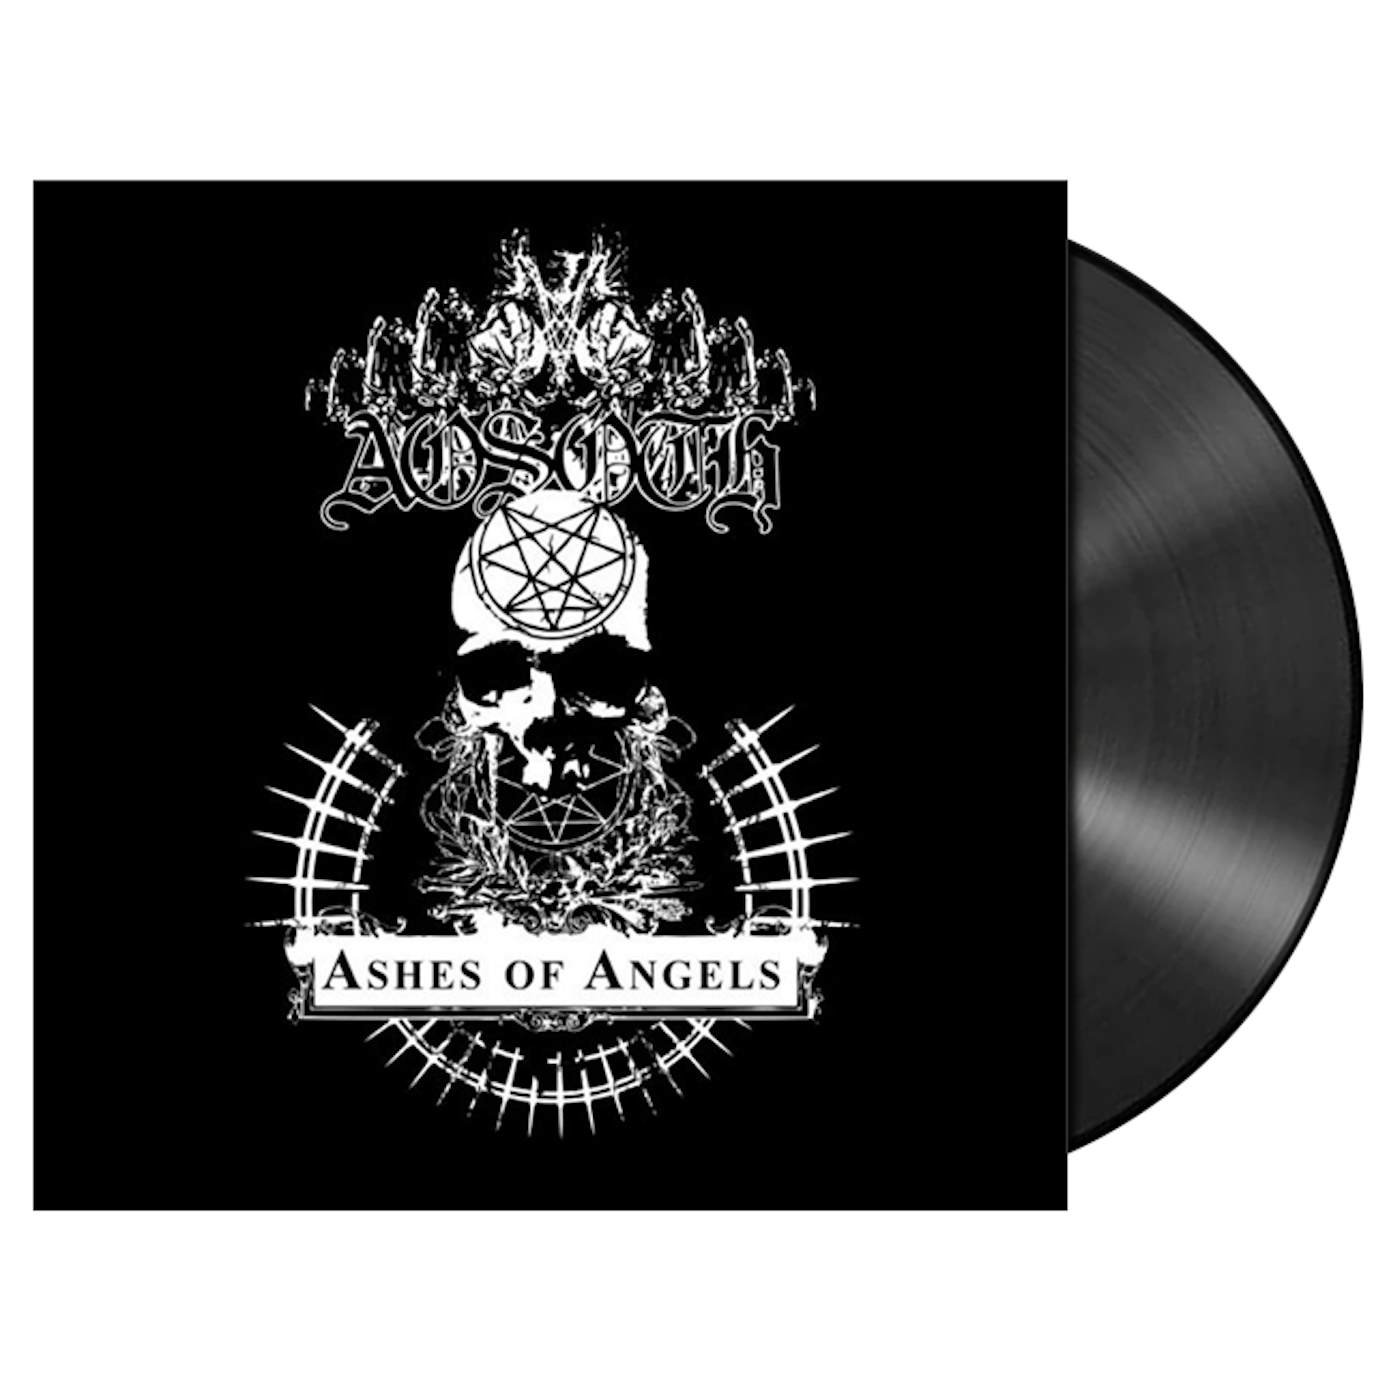 AOSOTH - 'Ashes Of Angels' LP (Vinyl)